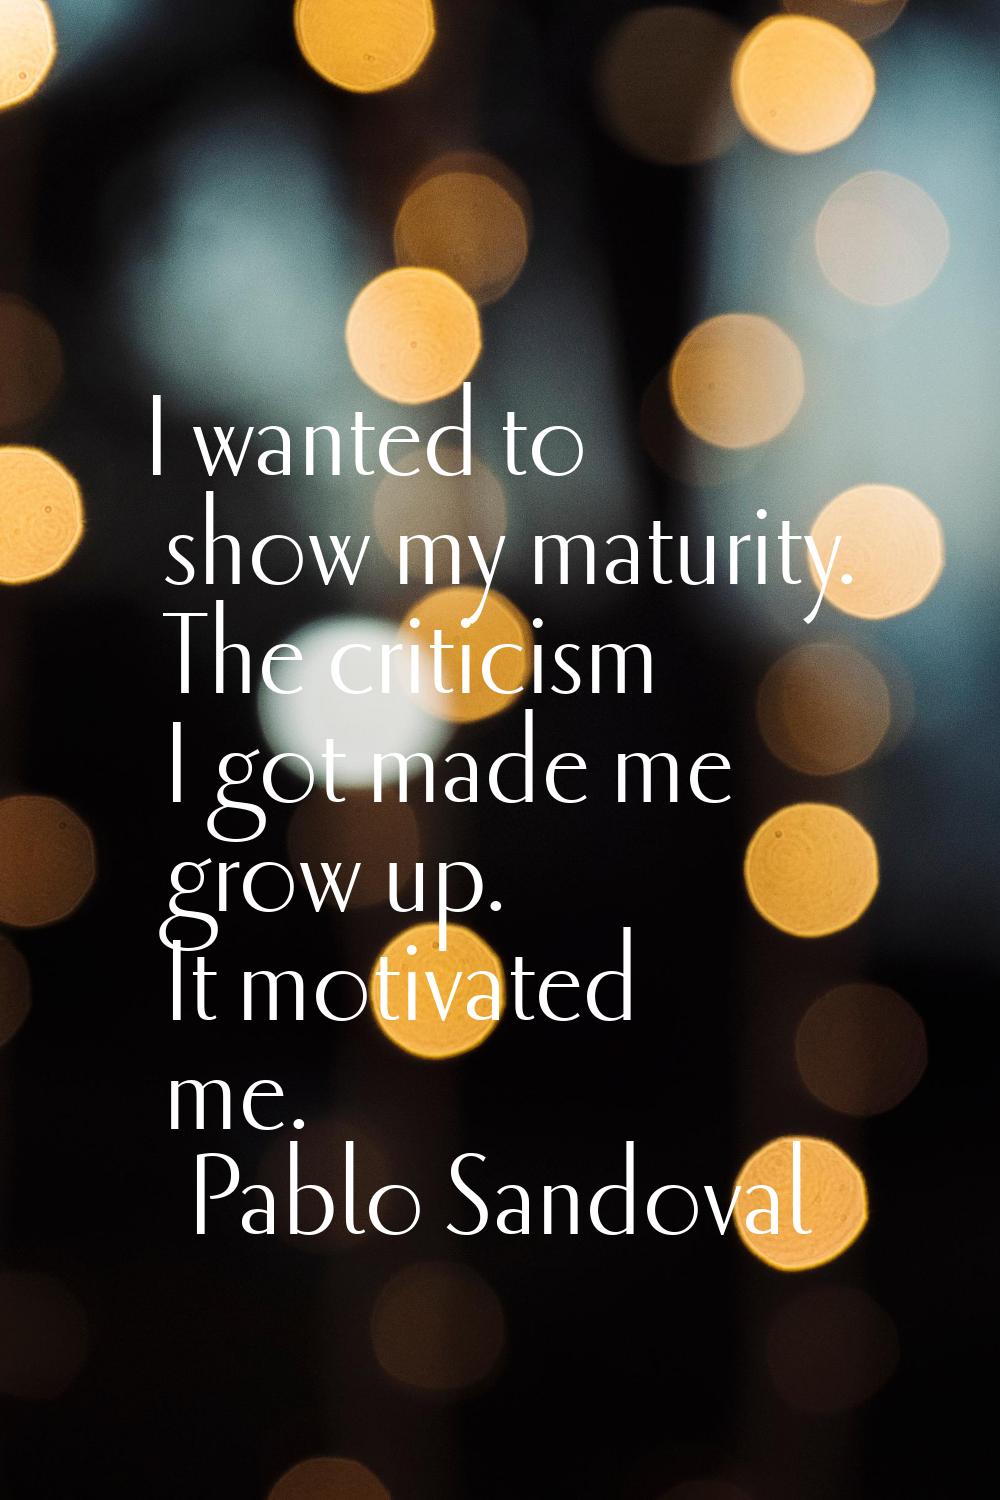 I wanted to show my maturity. The criticism I got made me grow up. It motivated me.